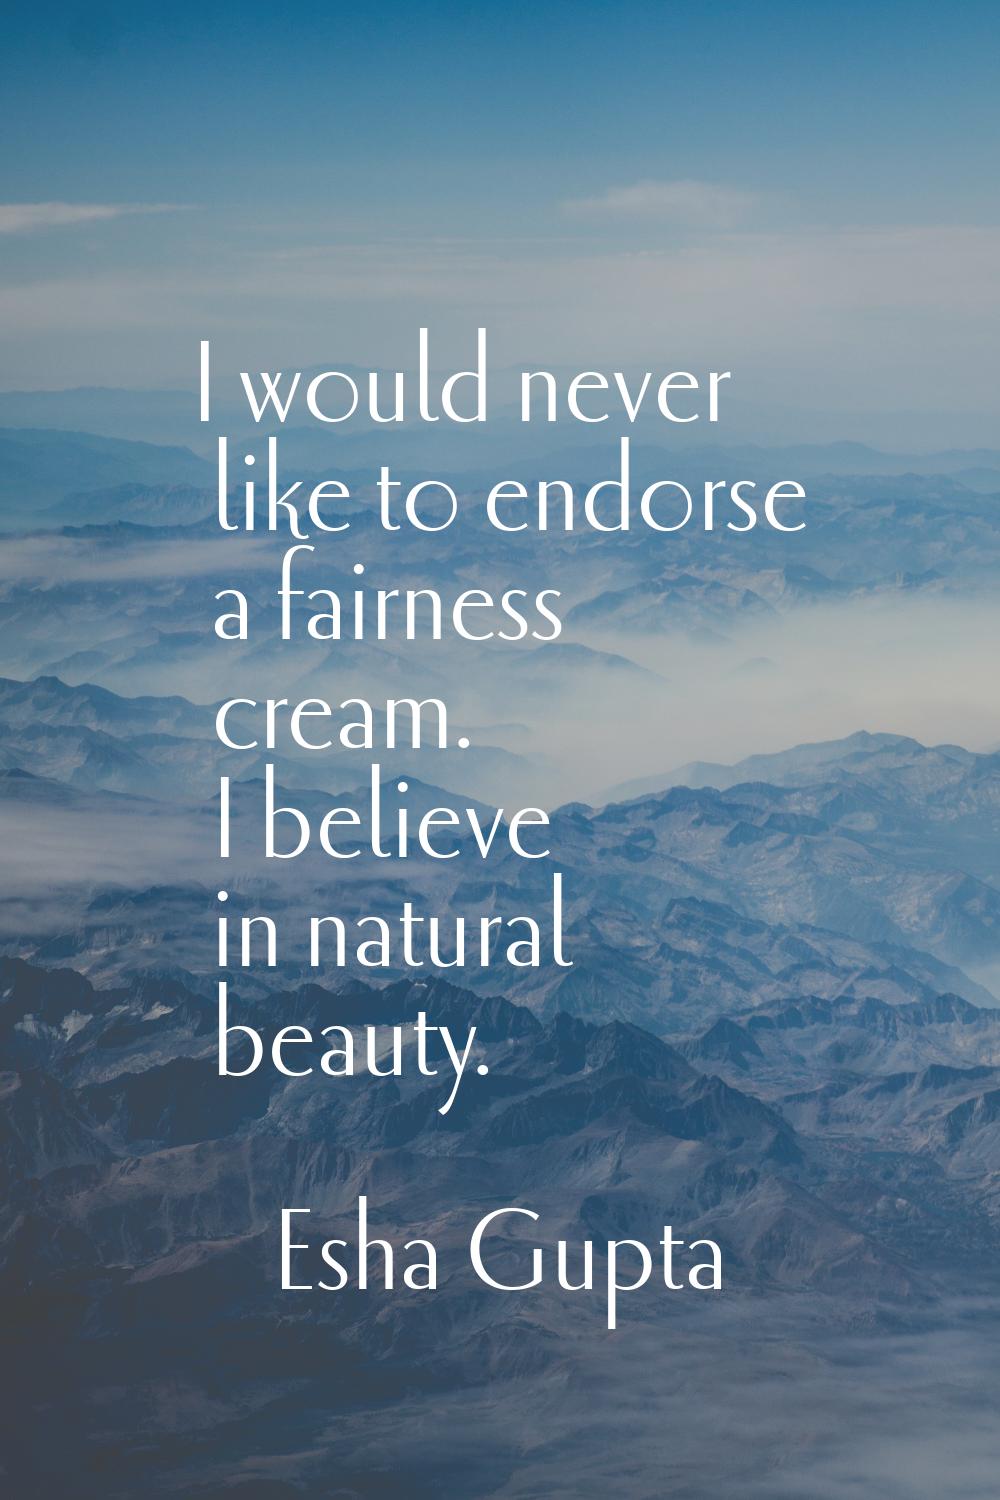 I would never like to endorse a fairness cream. I believe in natural beauty.